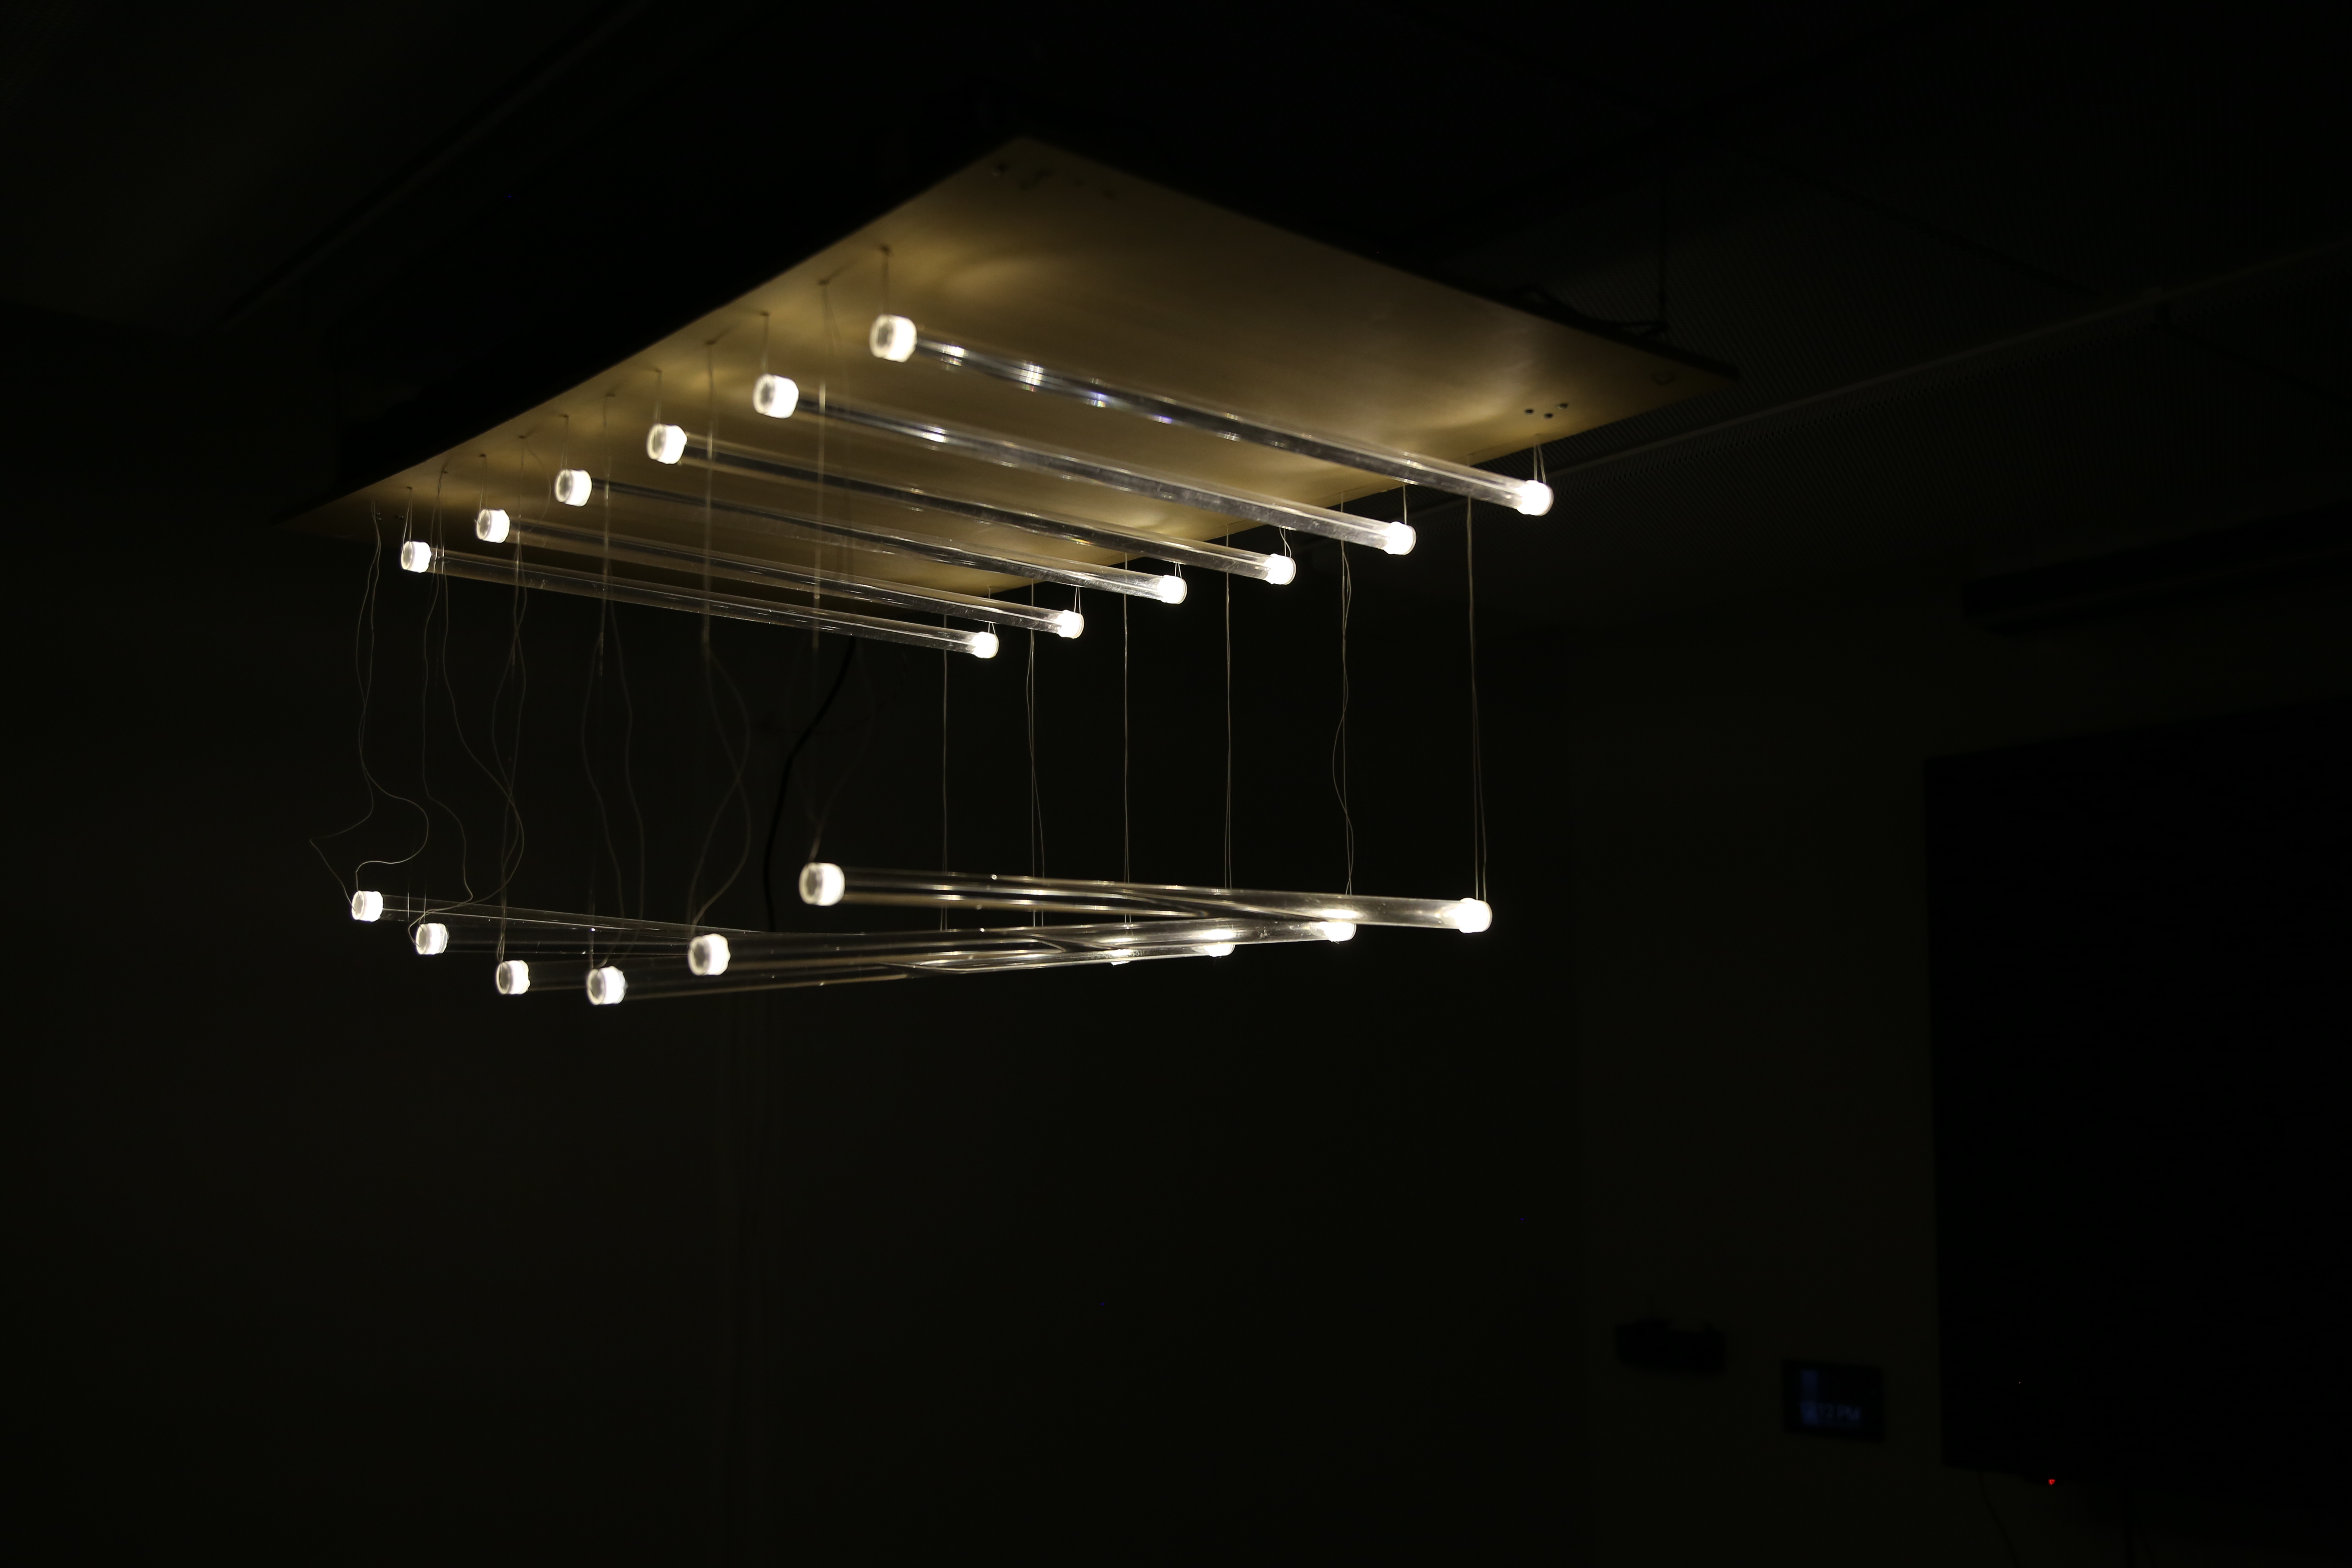 A kinetic light installation that expresses the motion of ebbs and flows